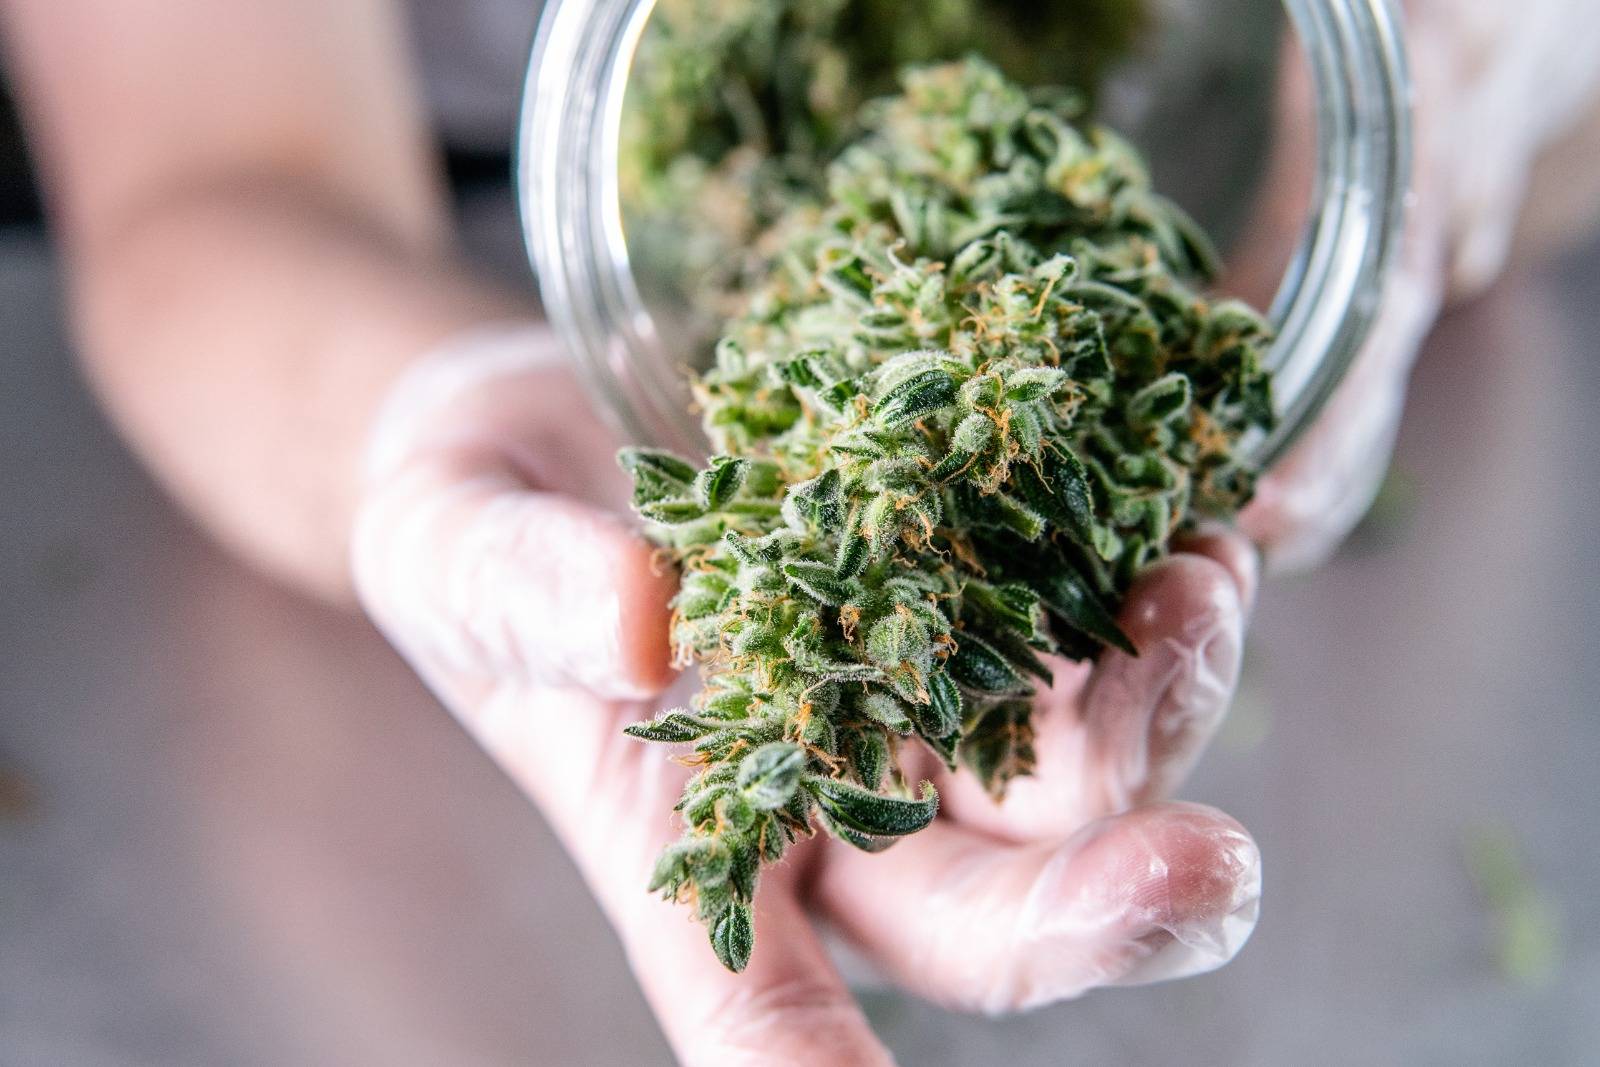 Marijuana buds storage in the glass jar for Vancouver Weed Delivery. Speed Greens